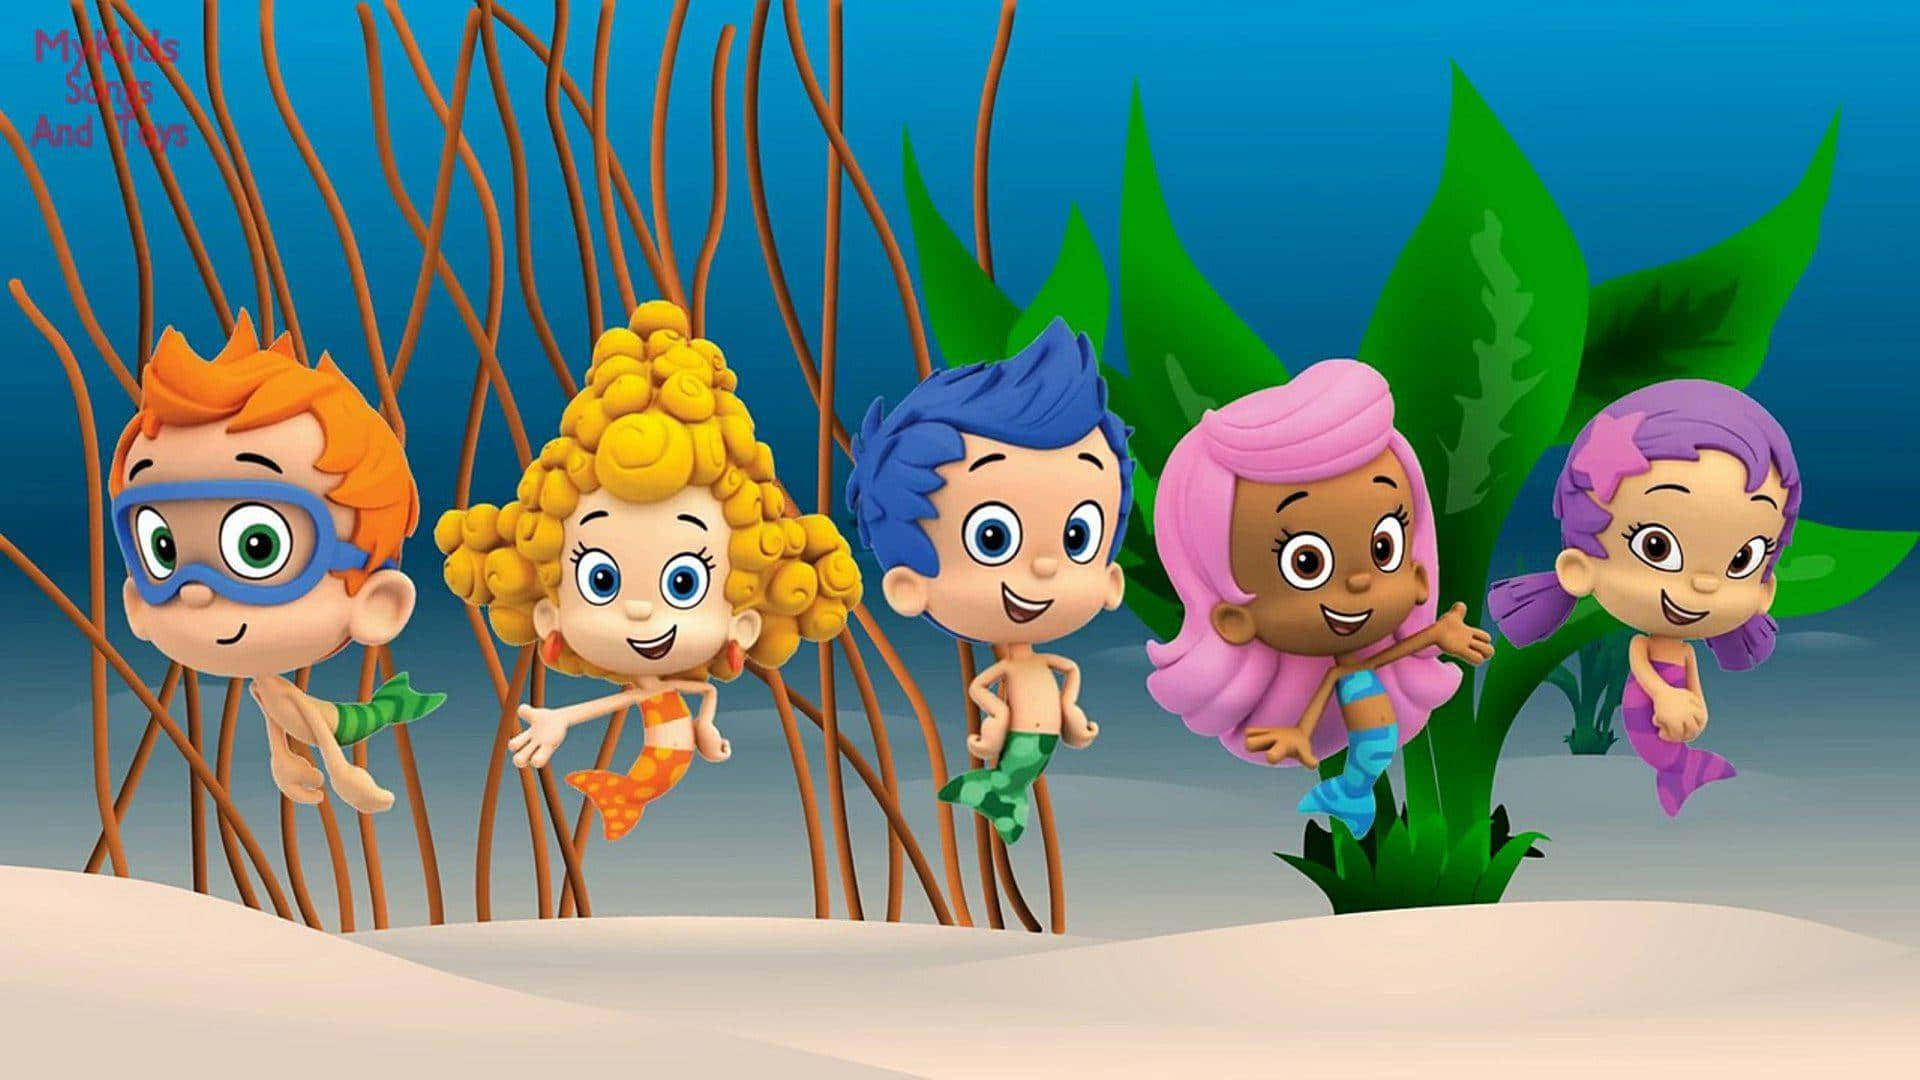 "Say Hi to the Bubble Guppies!"